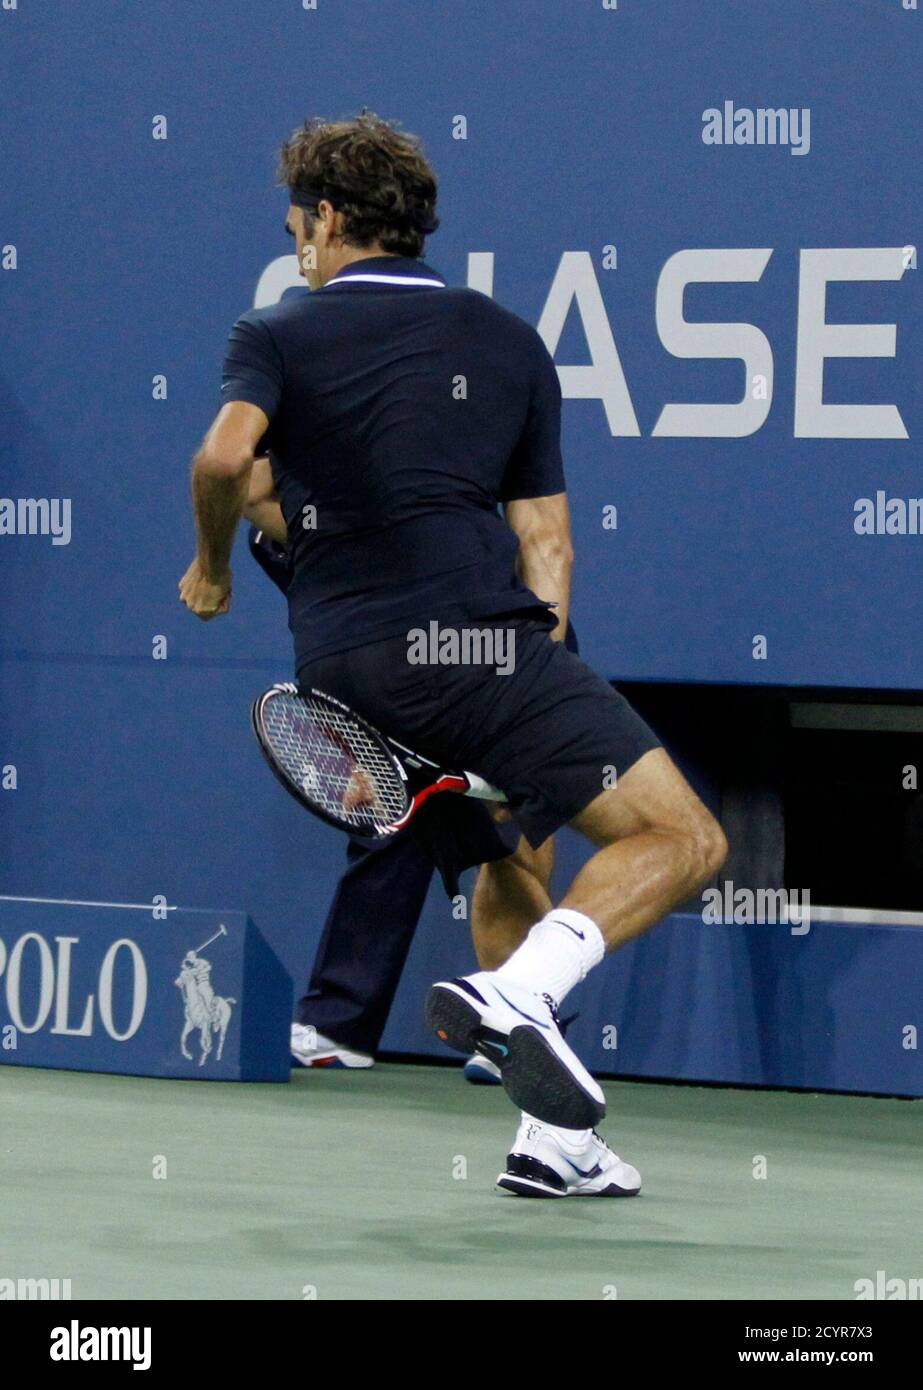 Roger Federer of Switzerland returns a winning shot between his legs while  playing Brian Dabul of Argentina during their opening night match at the  U.S. Open tennis tournament in New York, August